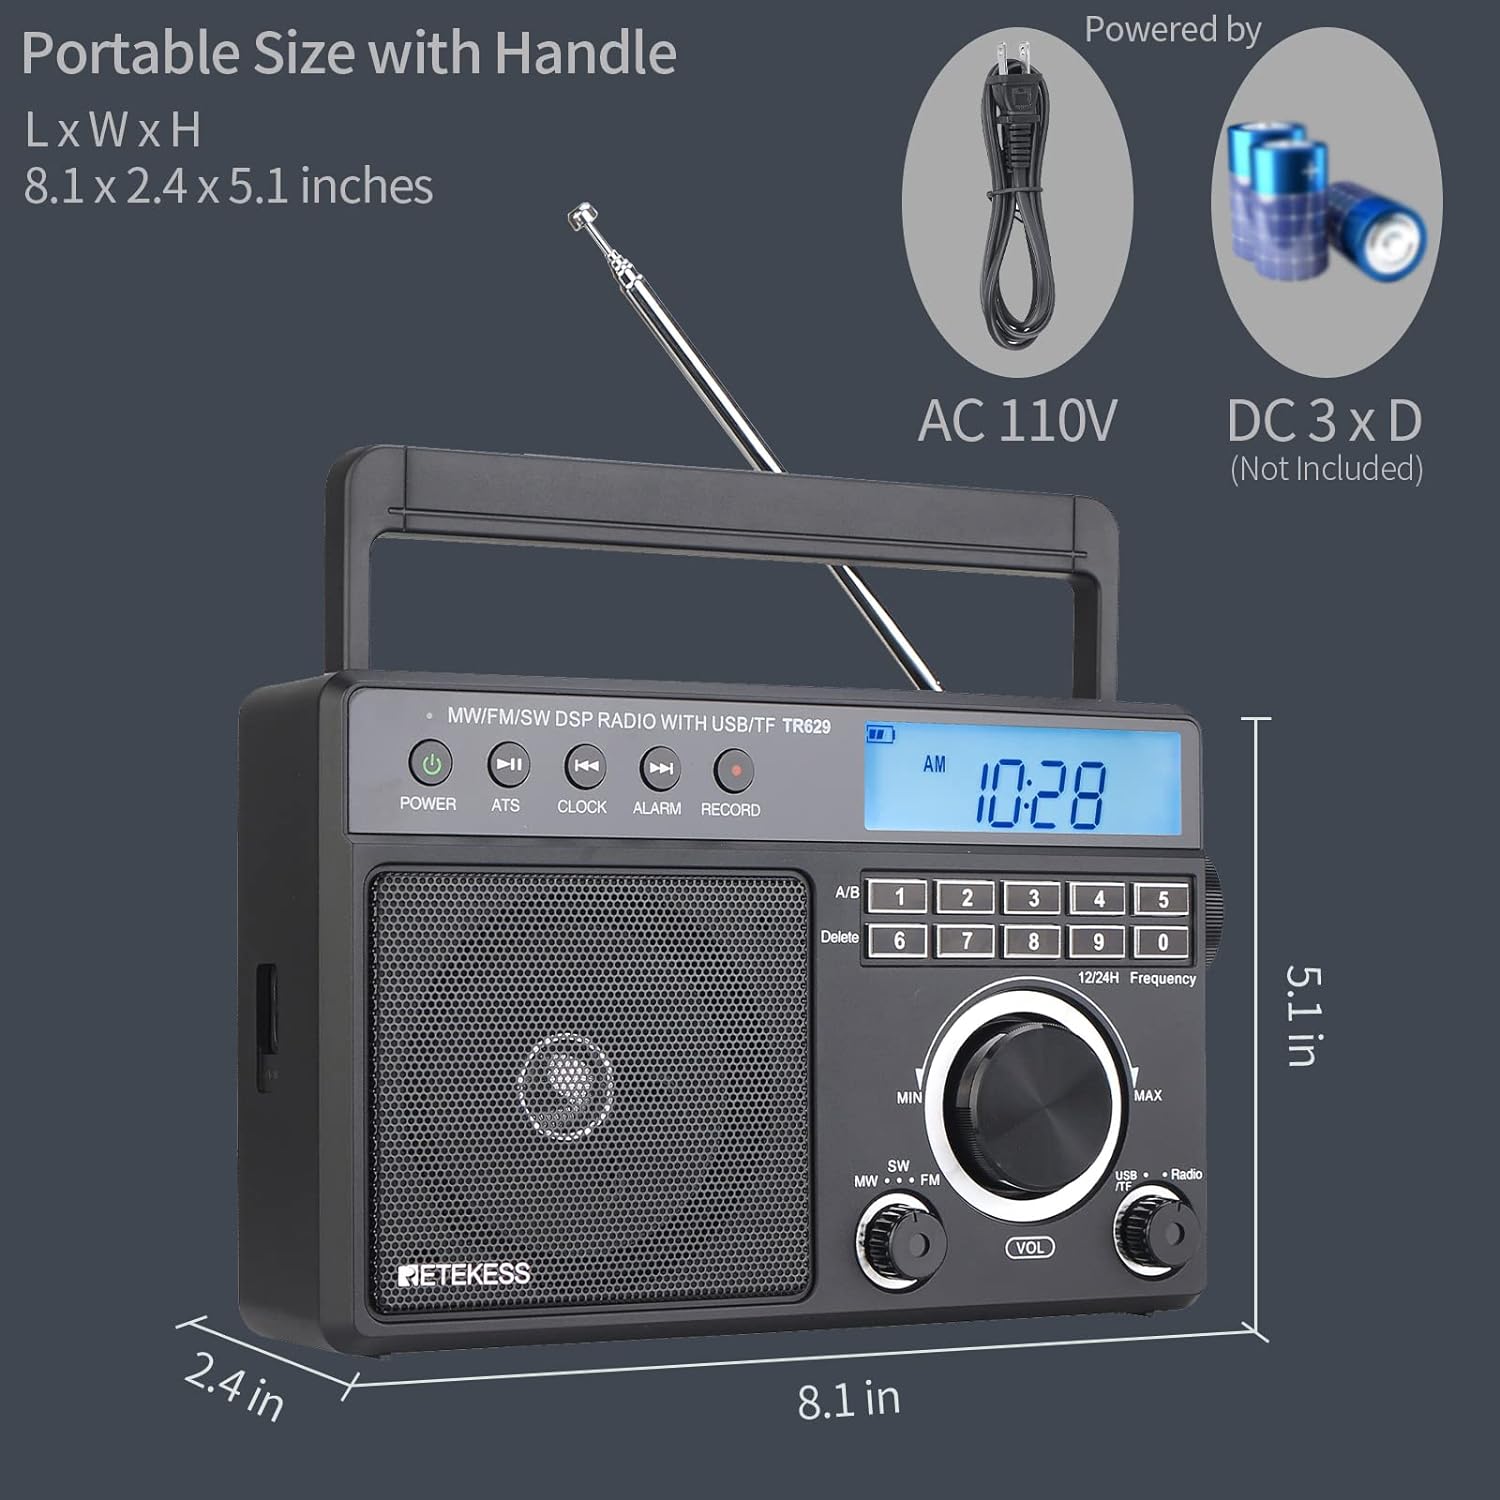  Retekess V115 Digital Radio AM FM, Portable Shortwave Radios,  Rechargeable Radio Digital Tuner and Presets, Support Micro SD and AUX  Record, Bass Speaker. : Electronics